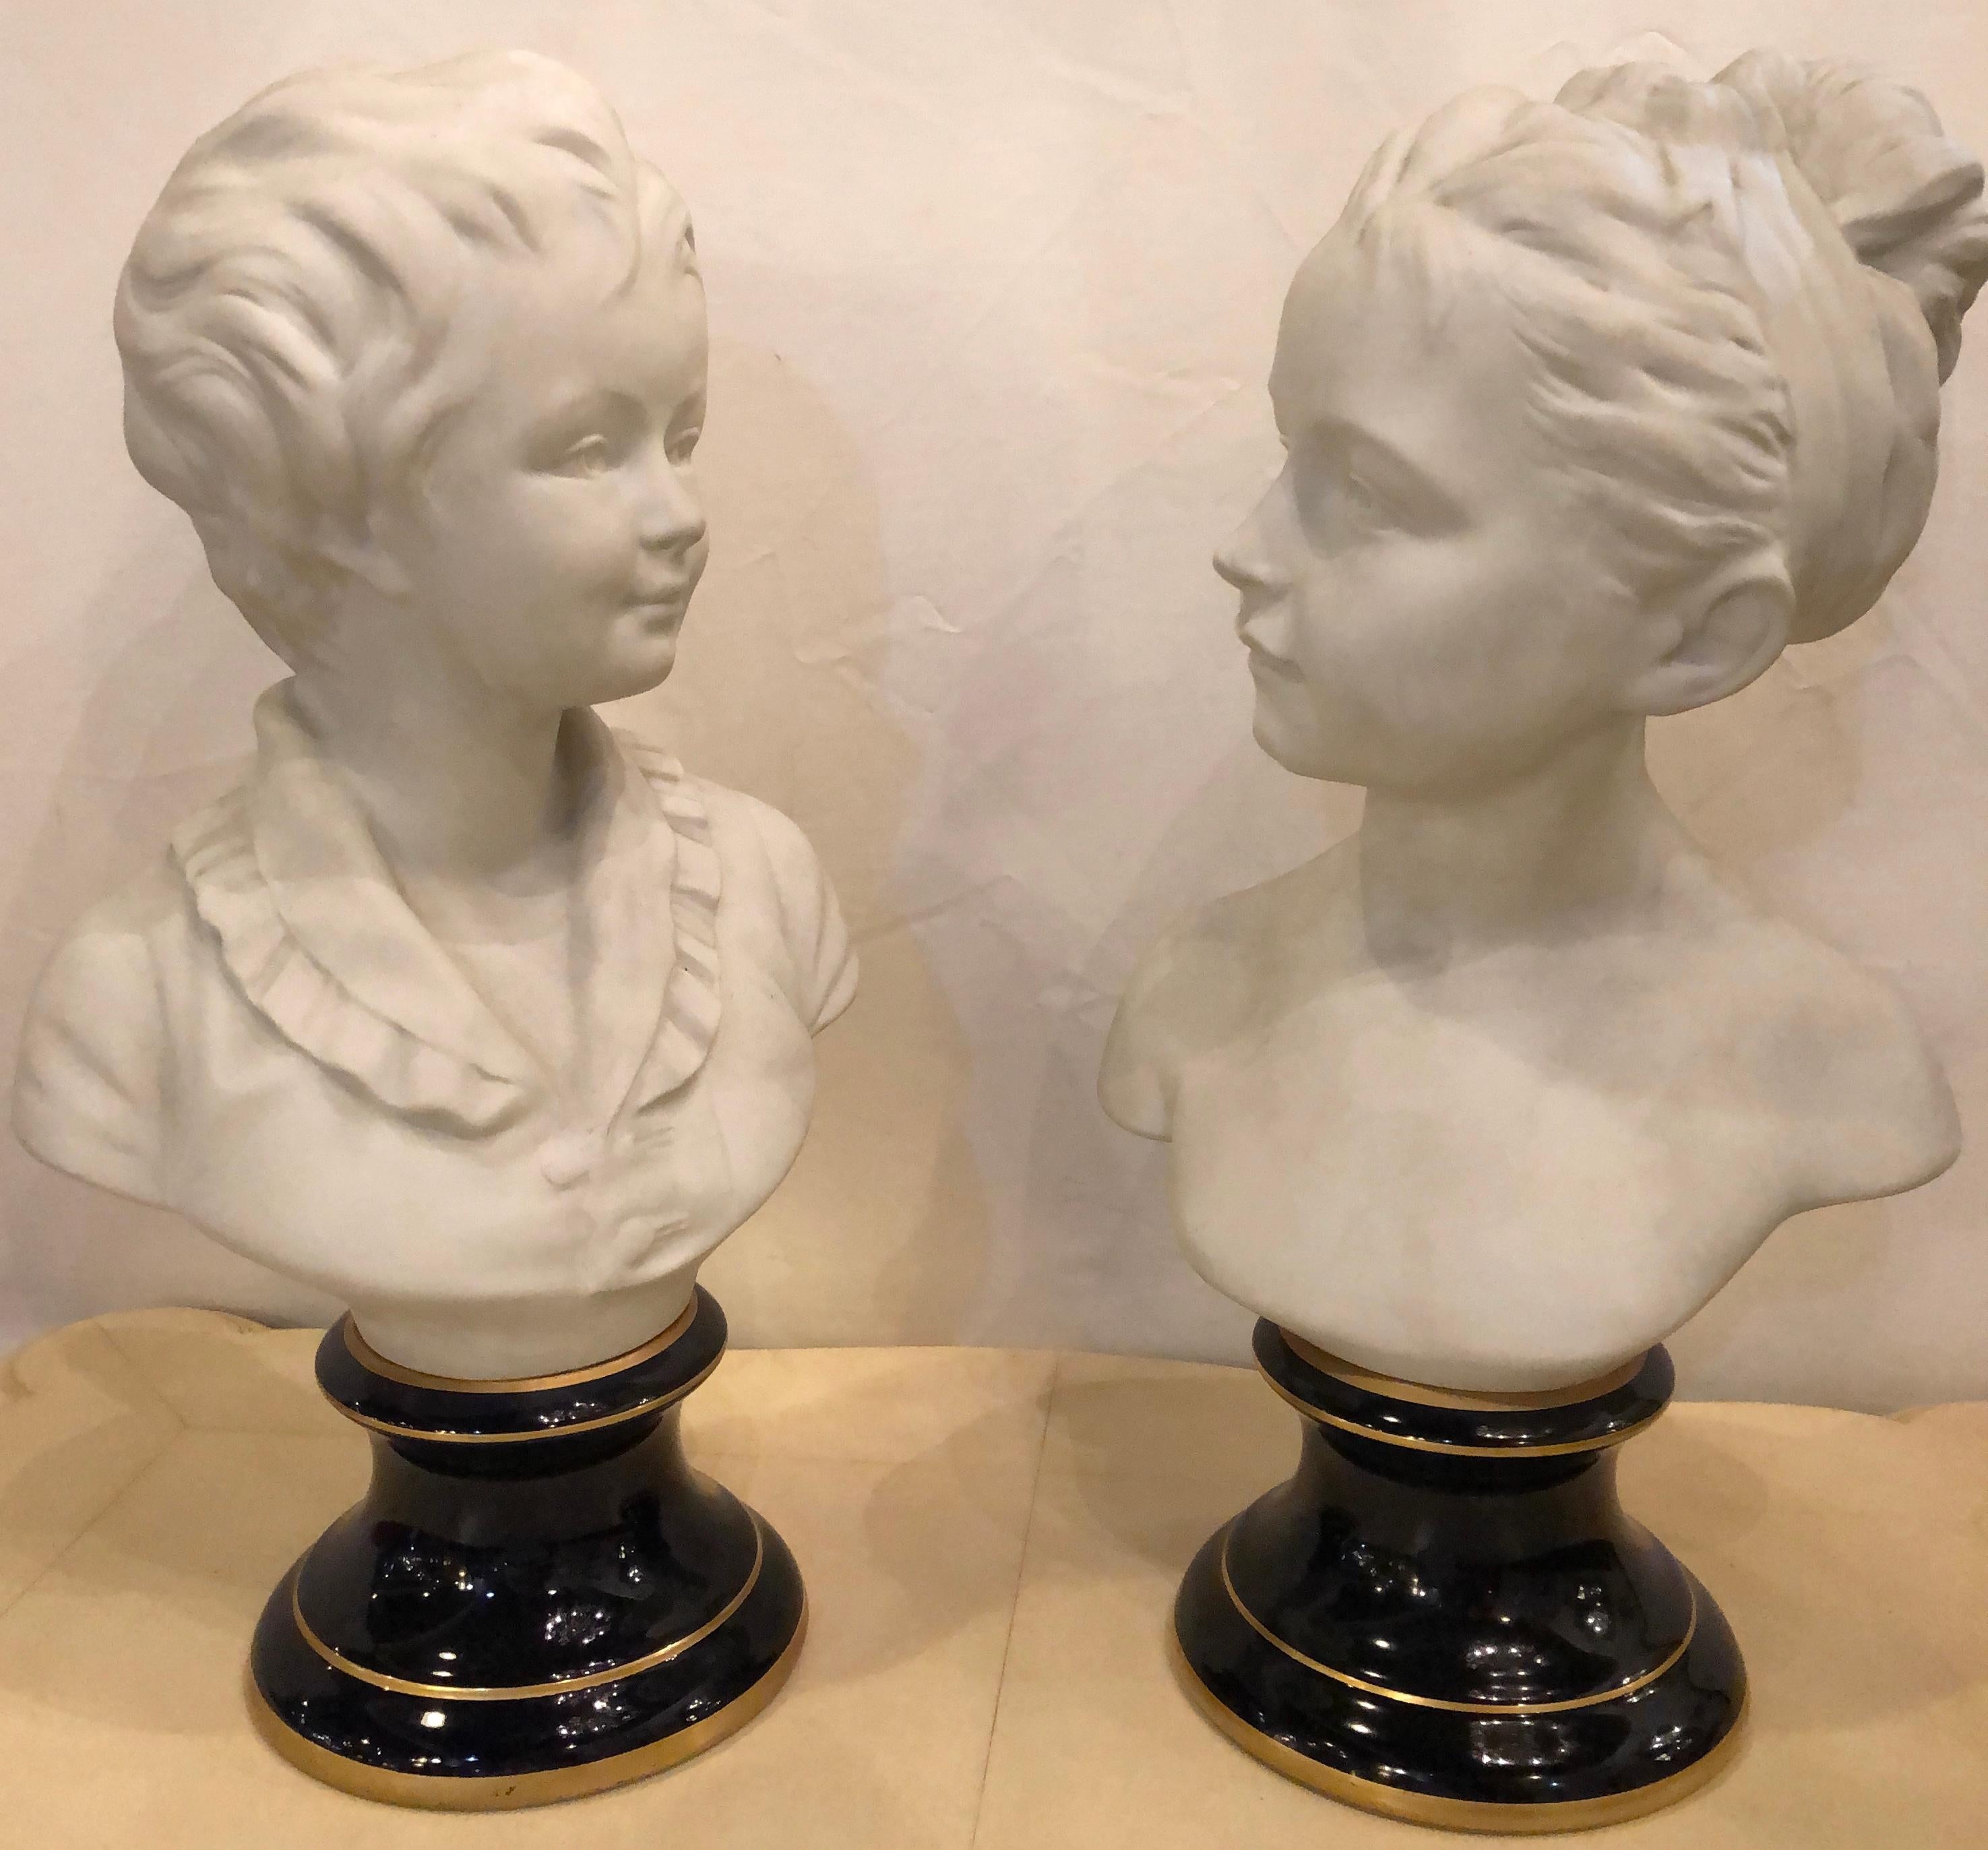 Belle Époque Pair of Limoges Parian and Blu Porcelain Busts of Young Children Stamped Fharaud